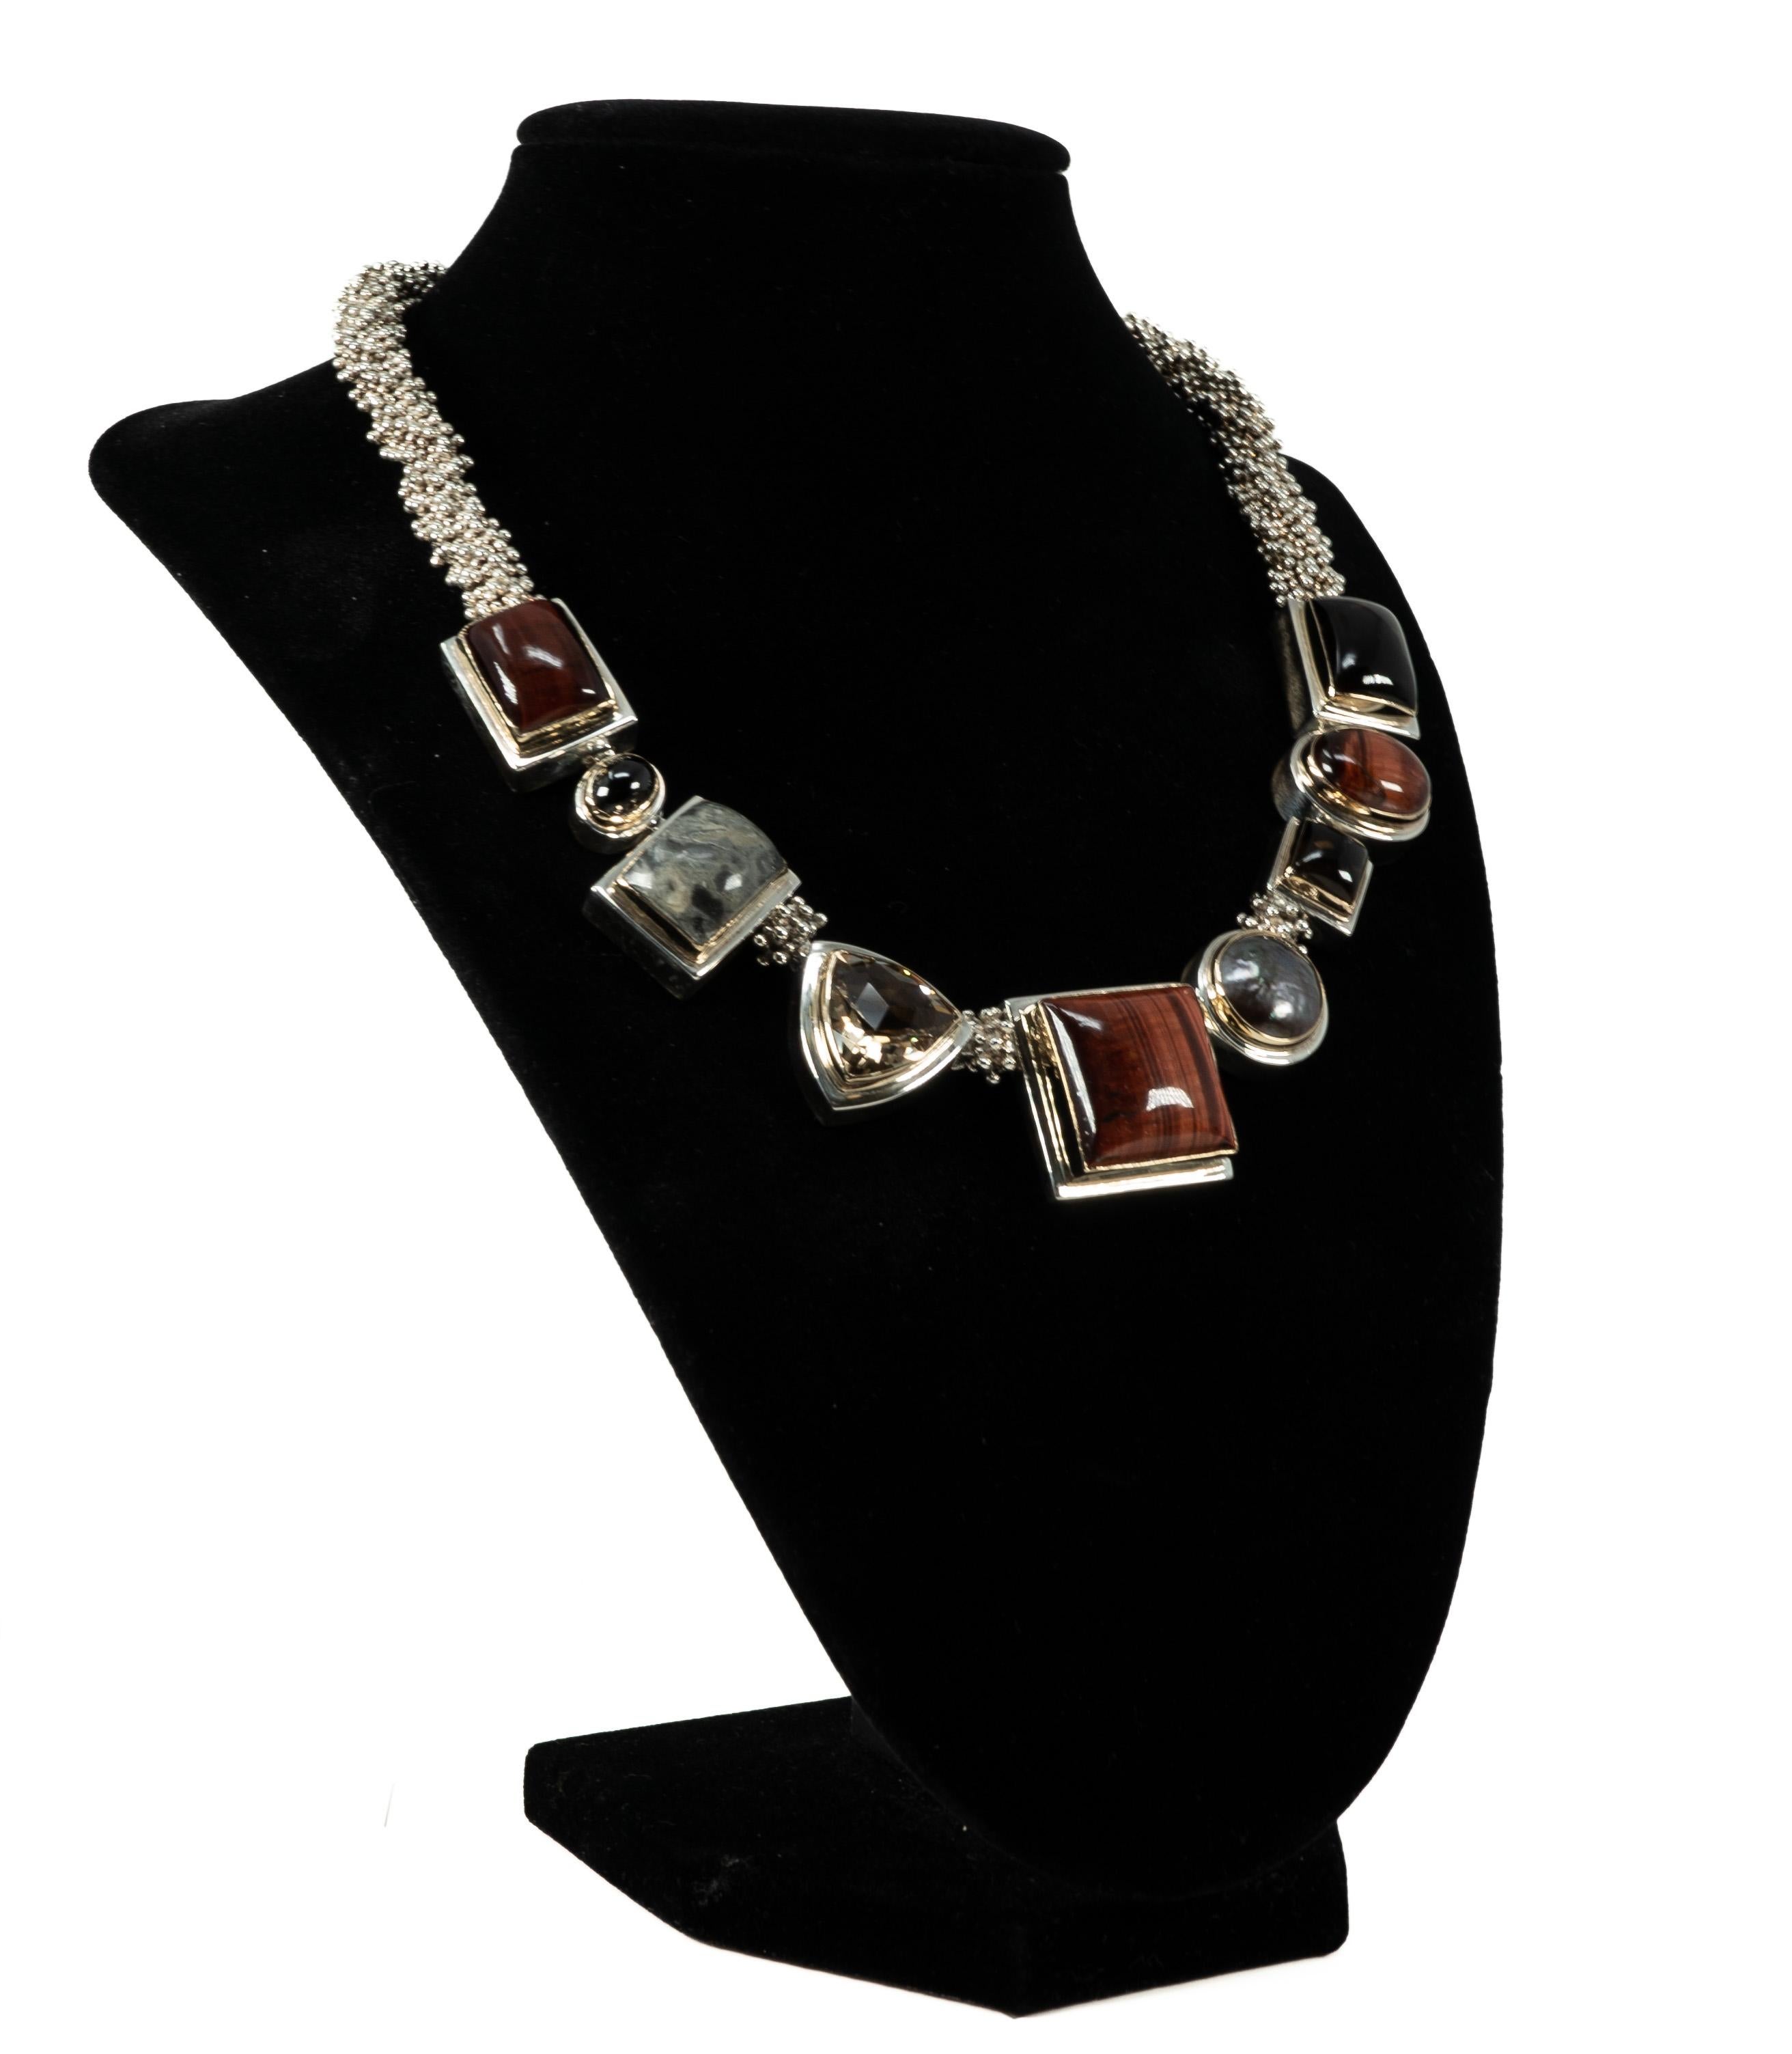 In sterling silver with various Red Tigers Eye, Quartz and hardstones.